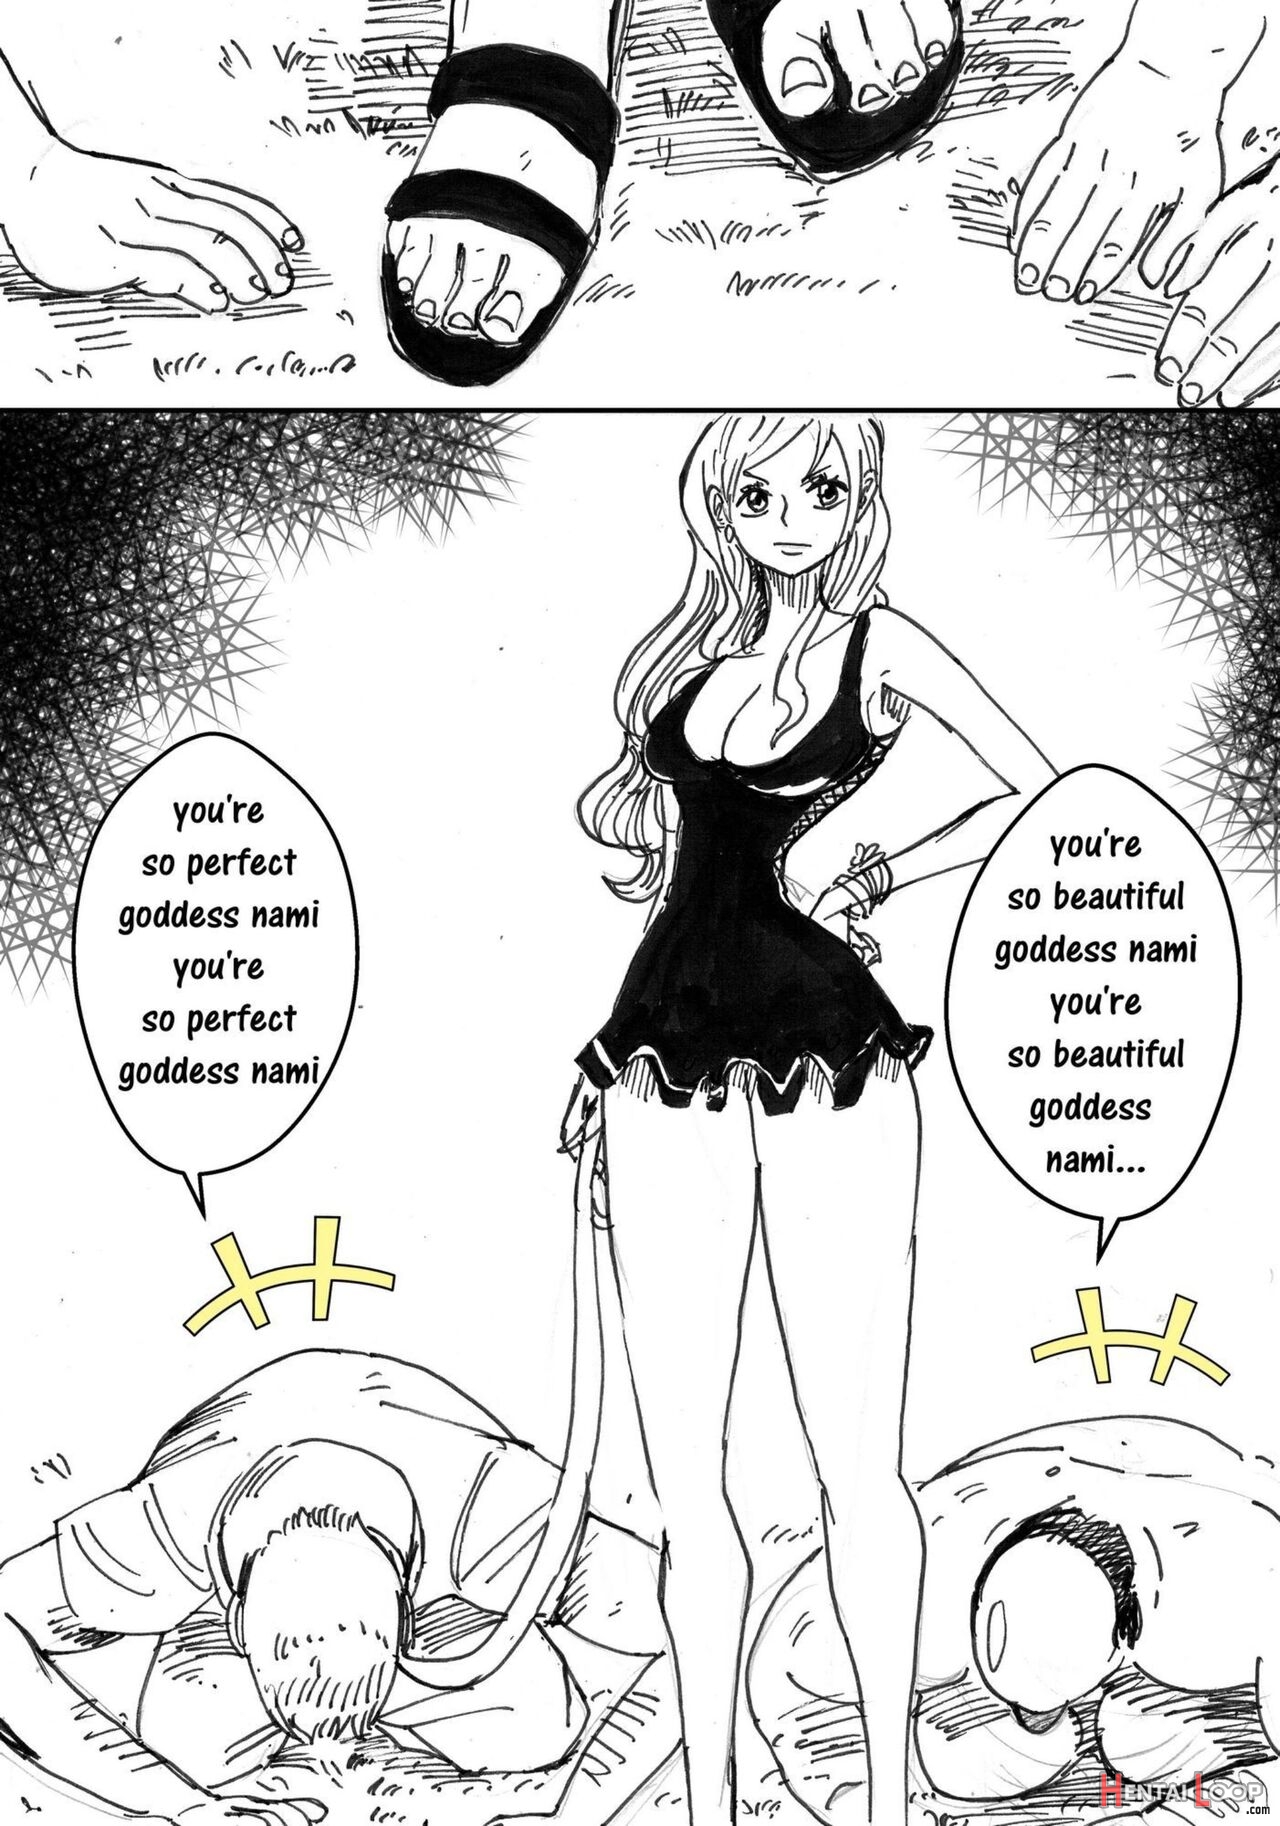 Nami's World 1 page 3